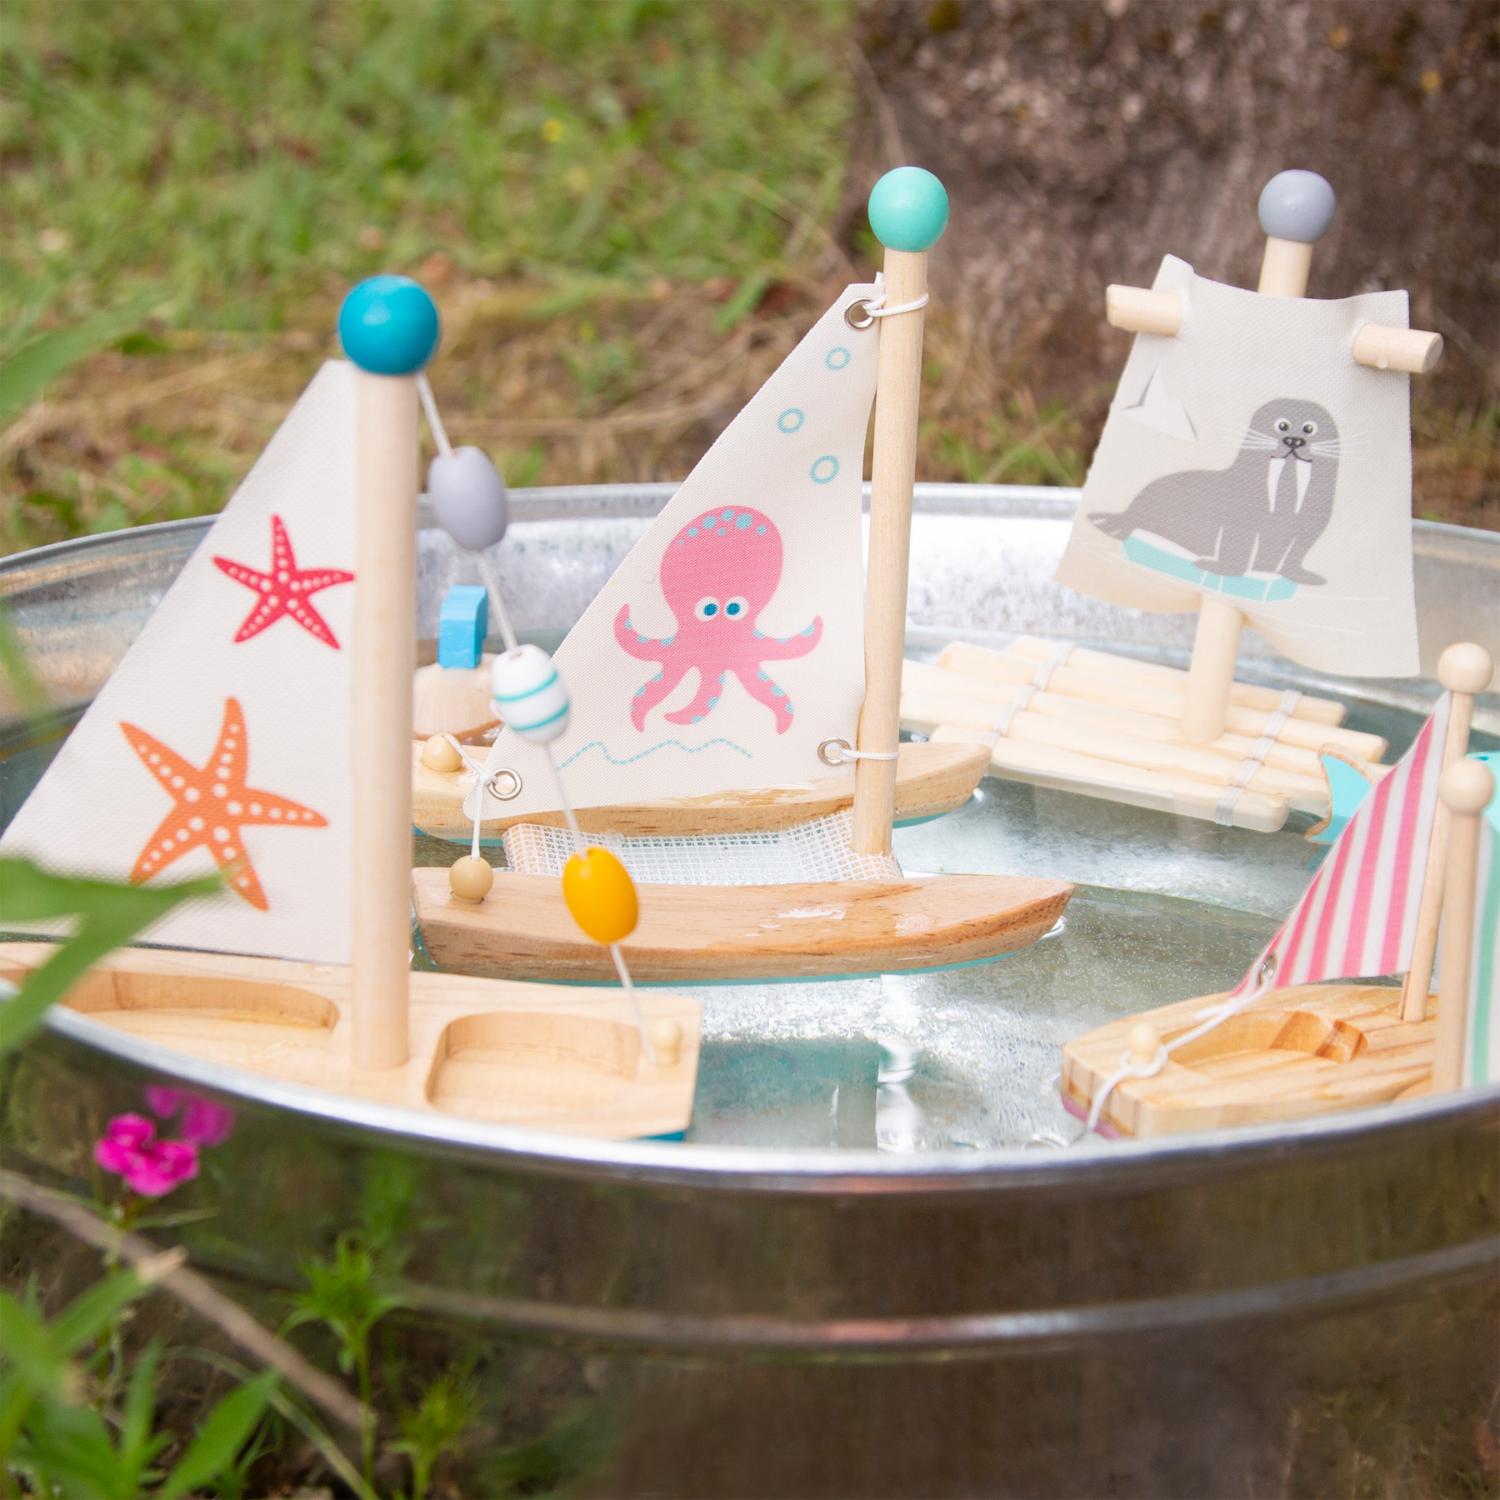 Legler Toys Wooden Toy Raft | Kids Bath Toy | Outdoor & Gardening | Lifestyle: Wooden Toy Raft and Wooden Toy Sailboats in Bucket | BeoVERDE.ie